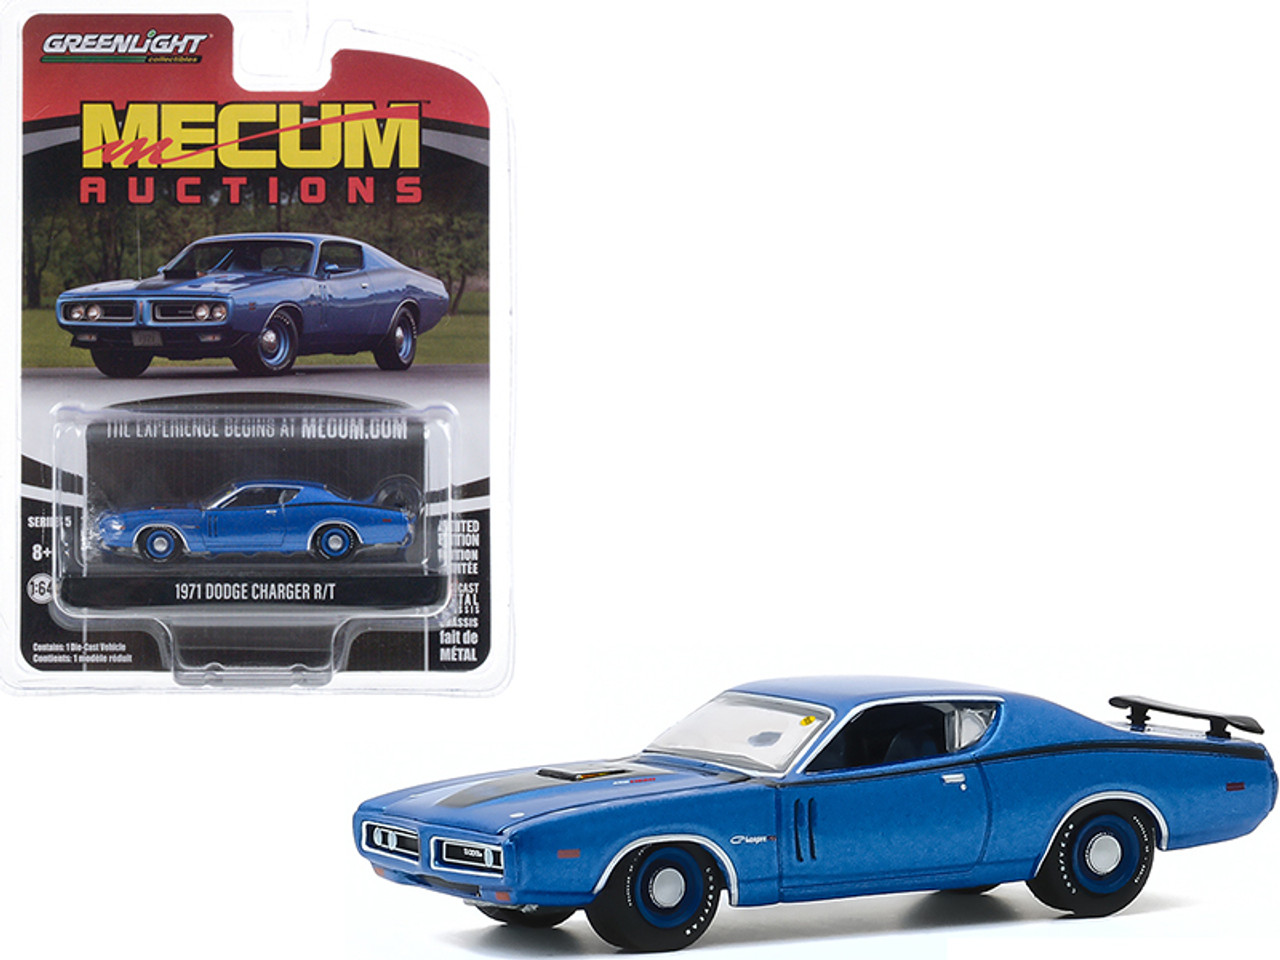 1971 Dodge Charger R/T Blue Metallic with Black Stripes (Dallas 2019) "Mecum Auctions Collector Cars" Series 5 1/64 Diecast Model Car by Greenlight